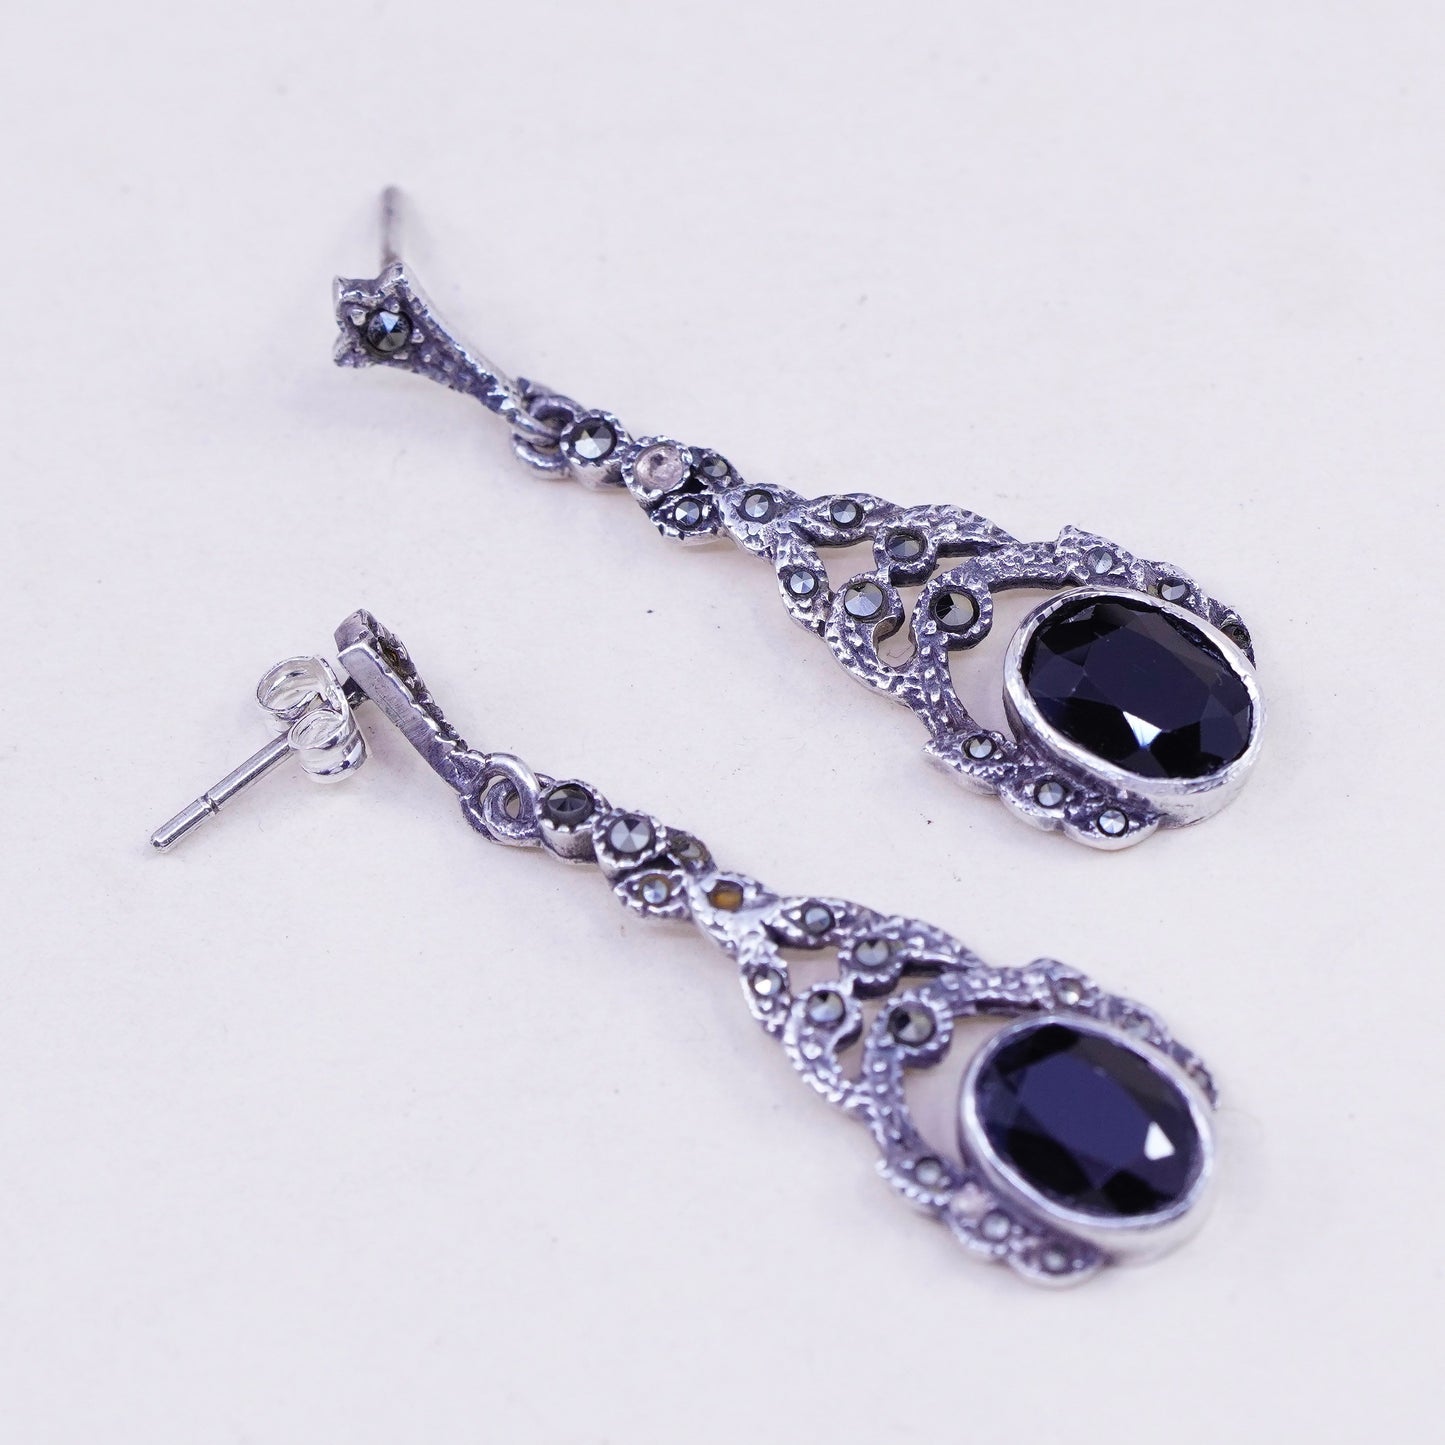 Vintage Sterling 925 silver handmade earrings with oval obsidian and marcasite